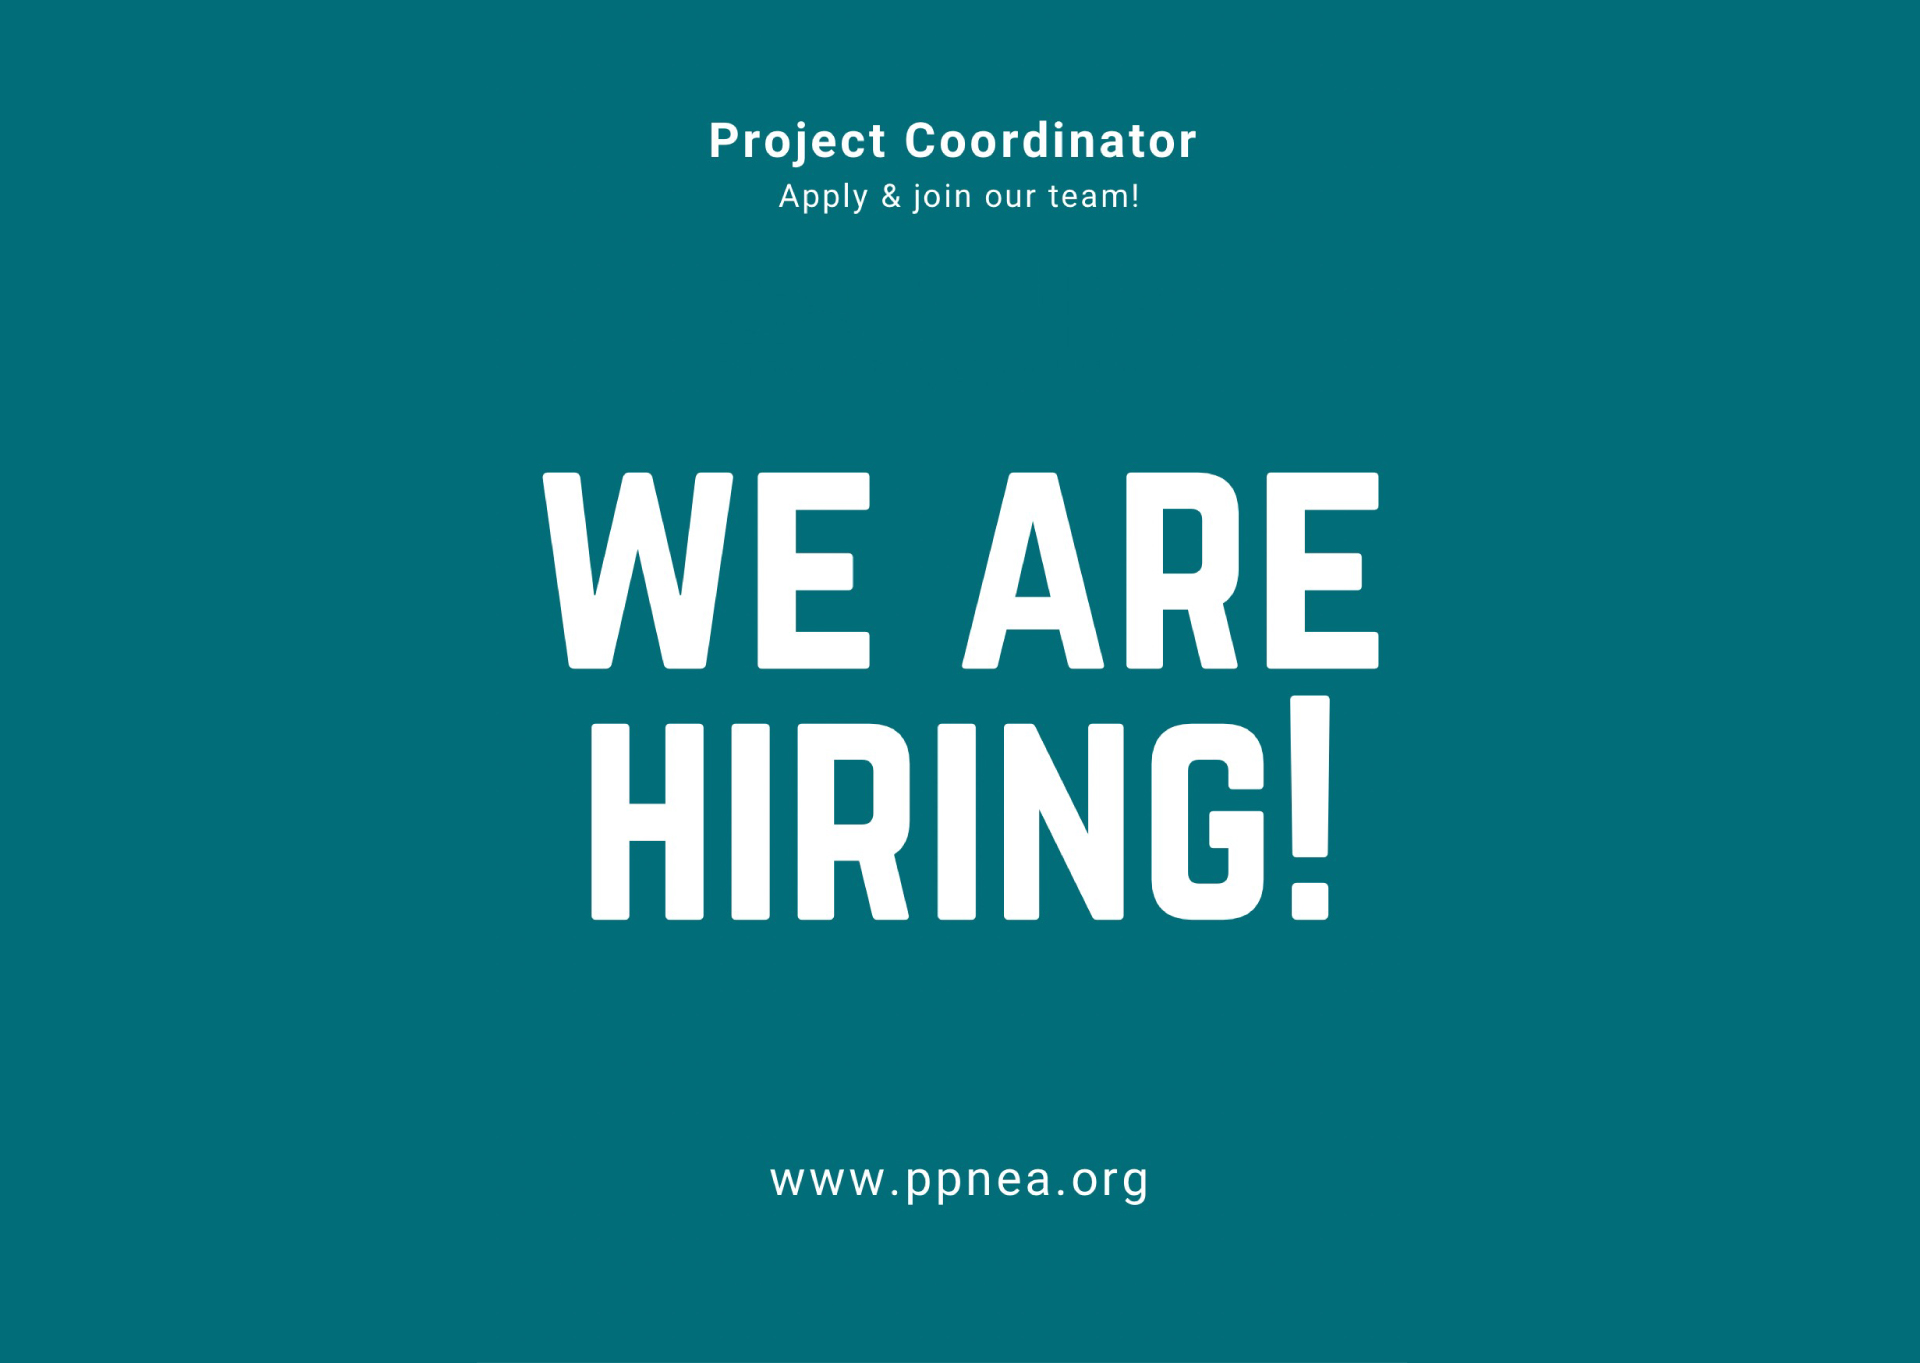 PPNEA is looking to hire a Project Coordinator